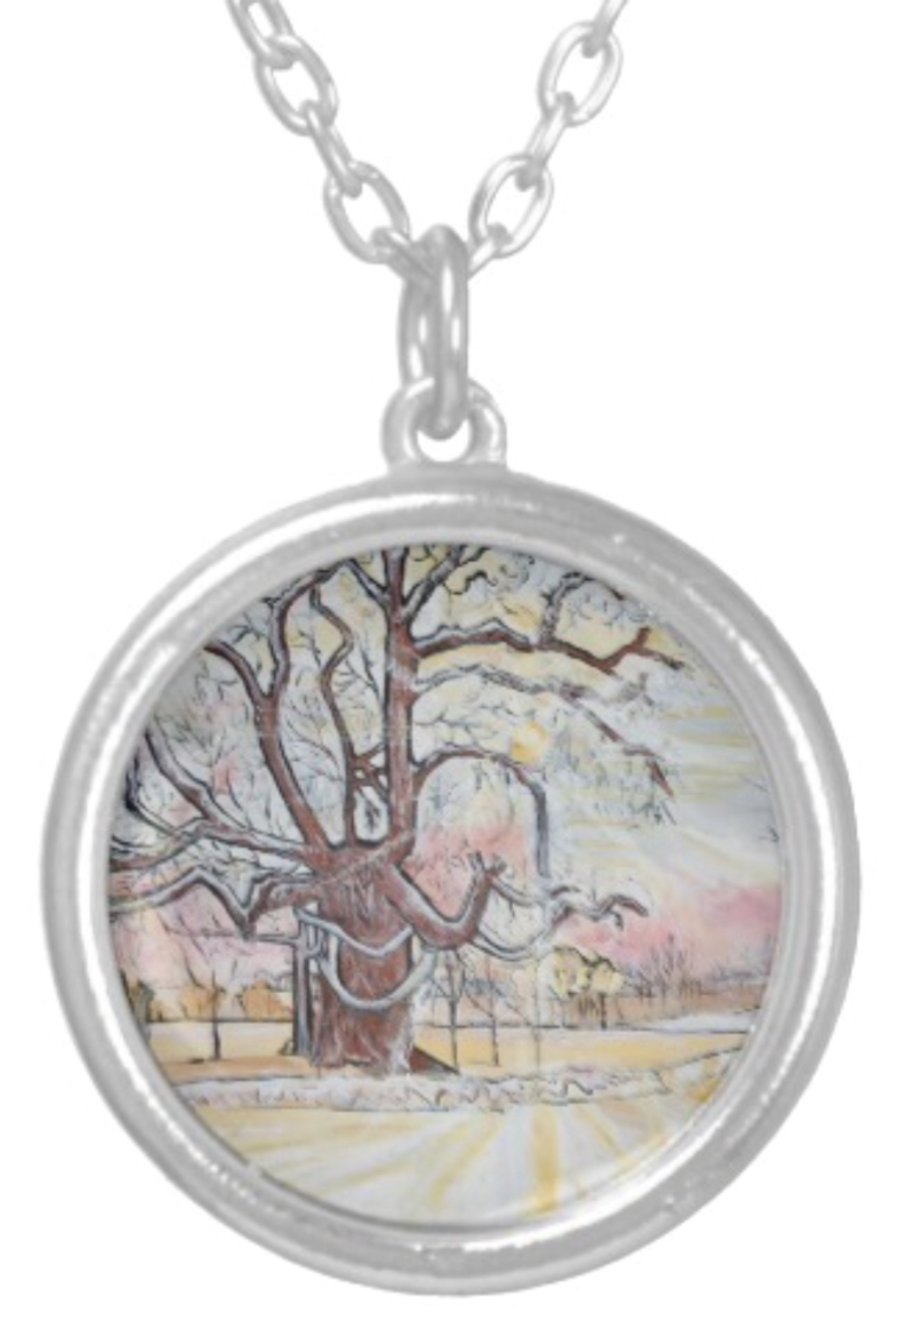 Beautiful Pendant featuring the design ‘Scattering Of Snow’